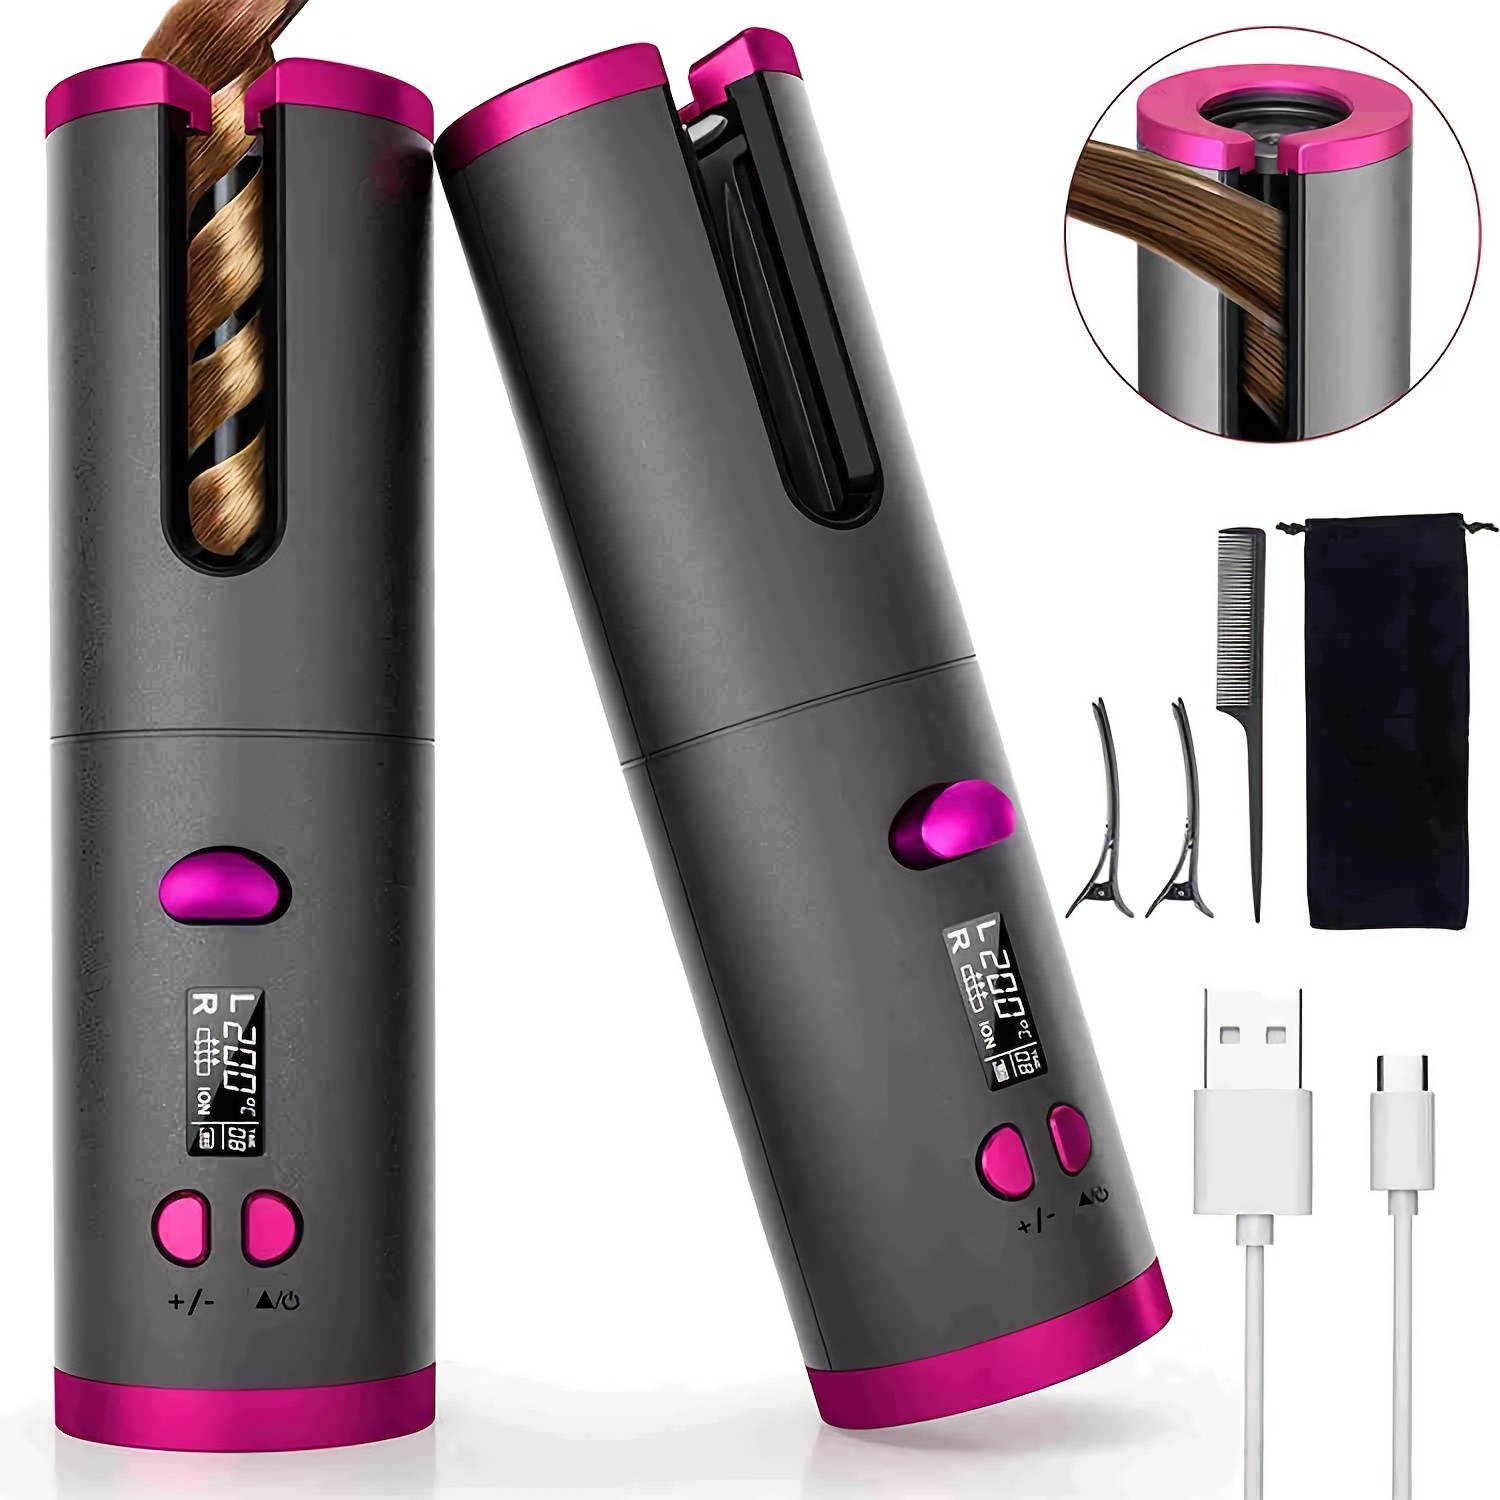 

Automatic Cordless Hair Curler, Portable Usb Rechargeable Curling Iron, Lcd Display, Suitable For Travel And Quick Styling